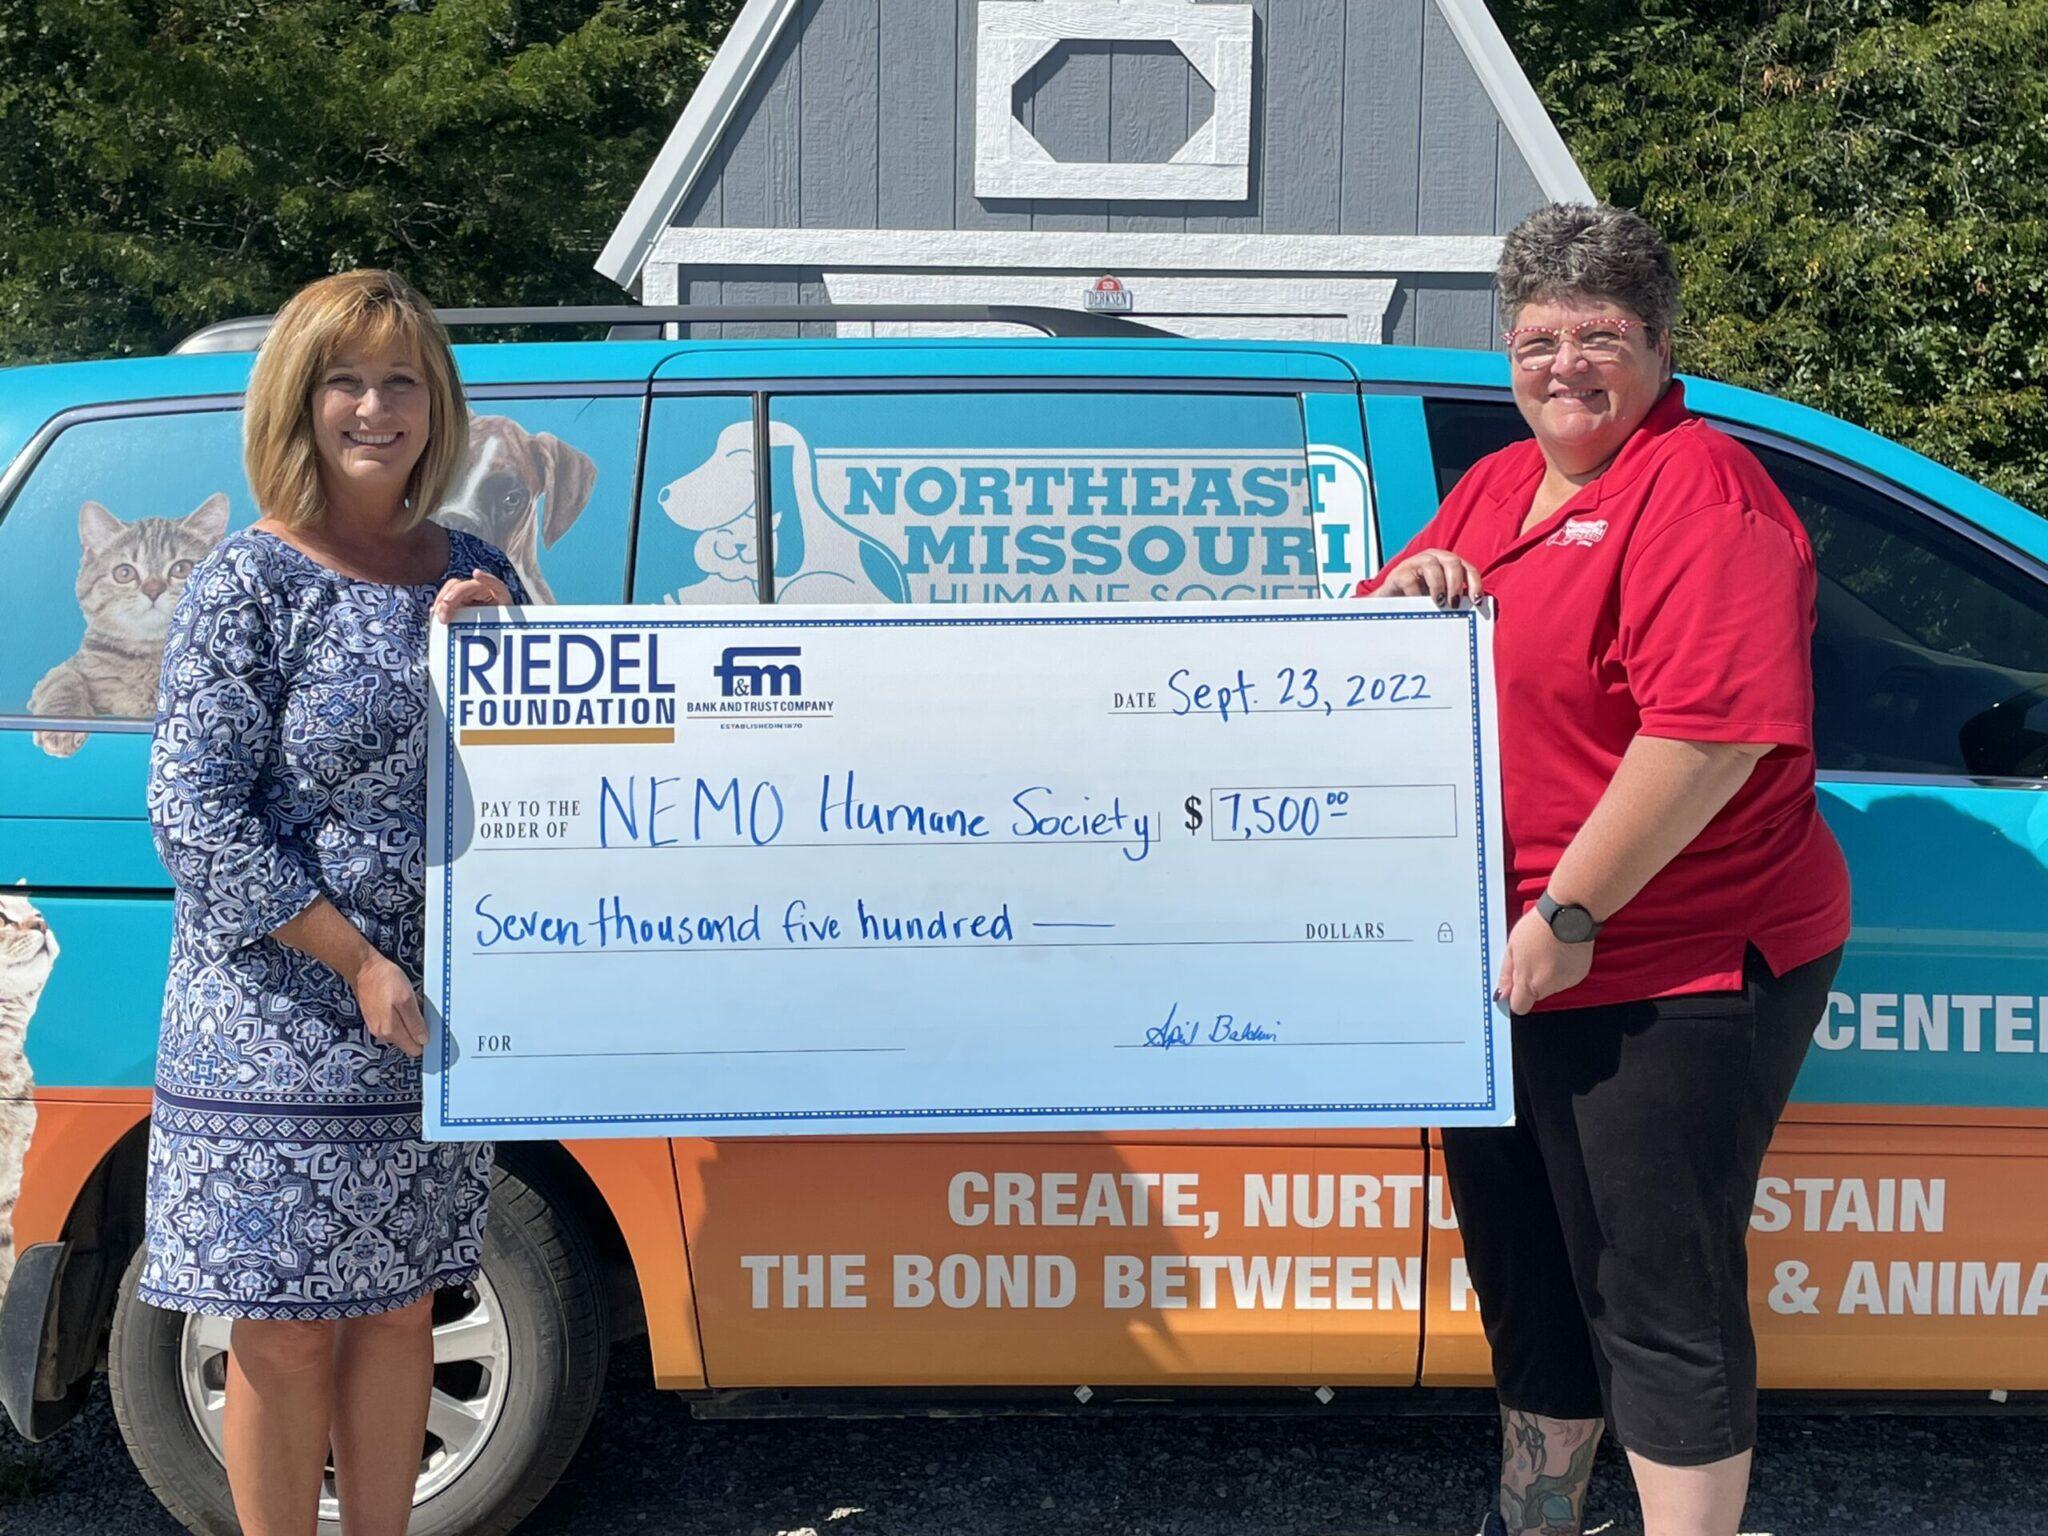 Riedel Foundation Grant Supports Spay and Neuter Program in Hannibal